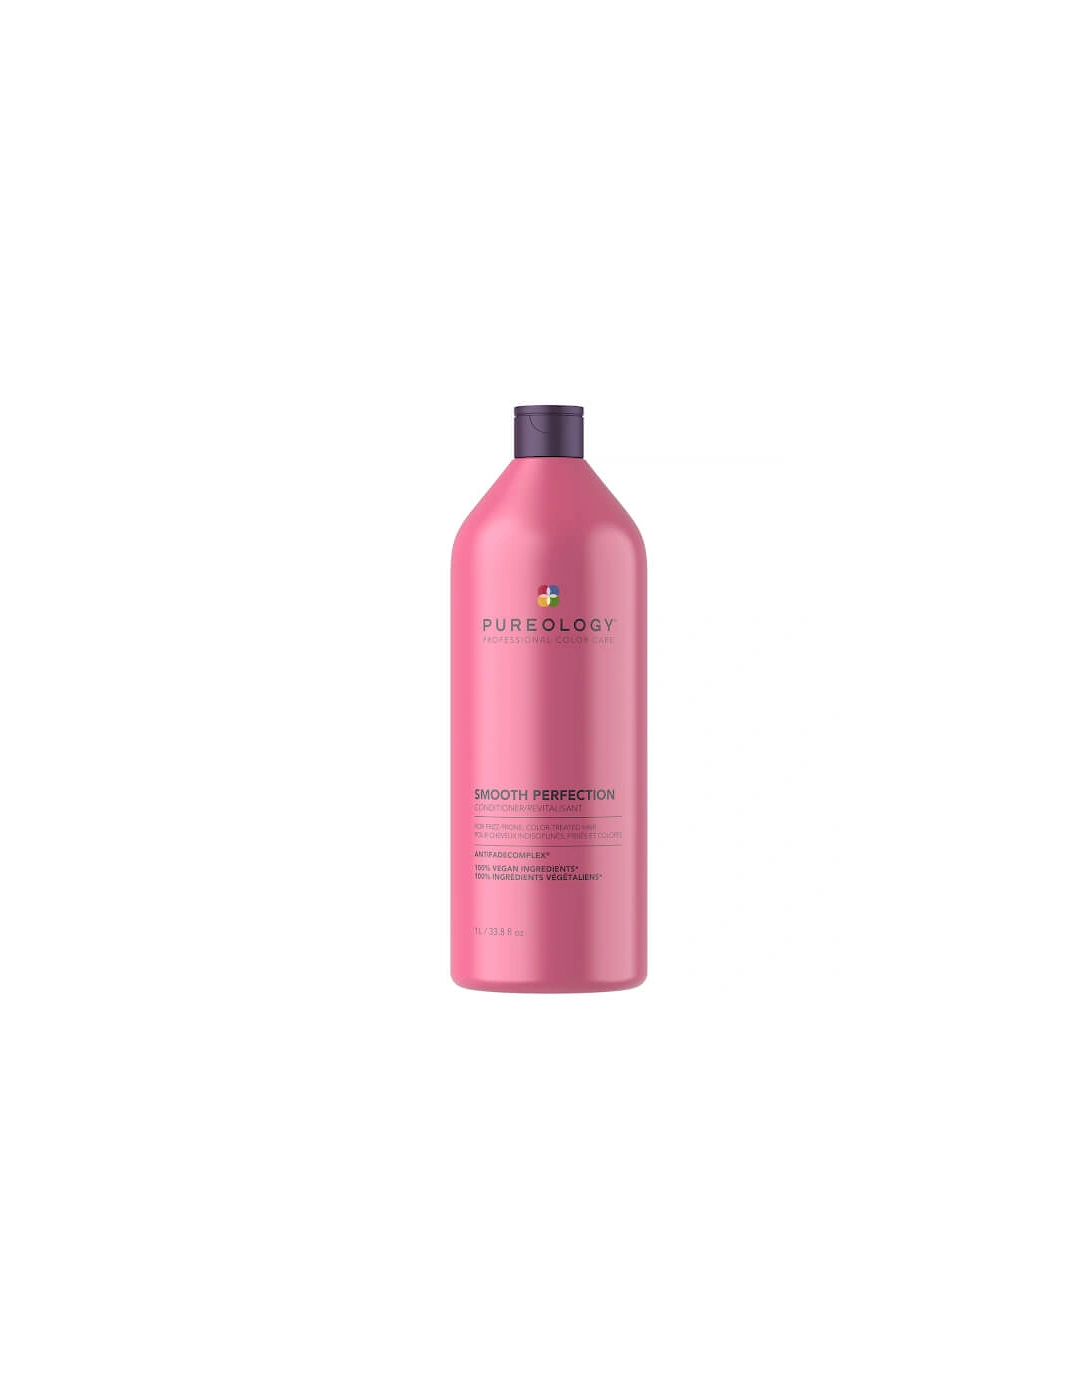 Smooth Perfection Conditioner 1000ml - Pureology, 2 of 1